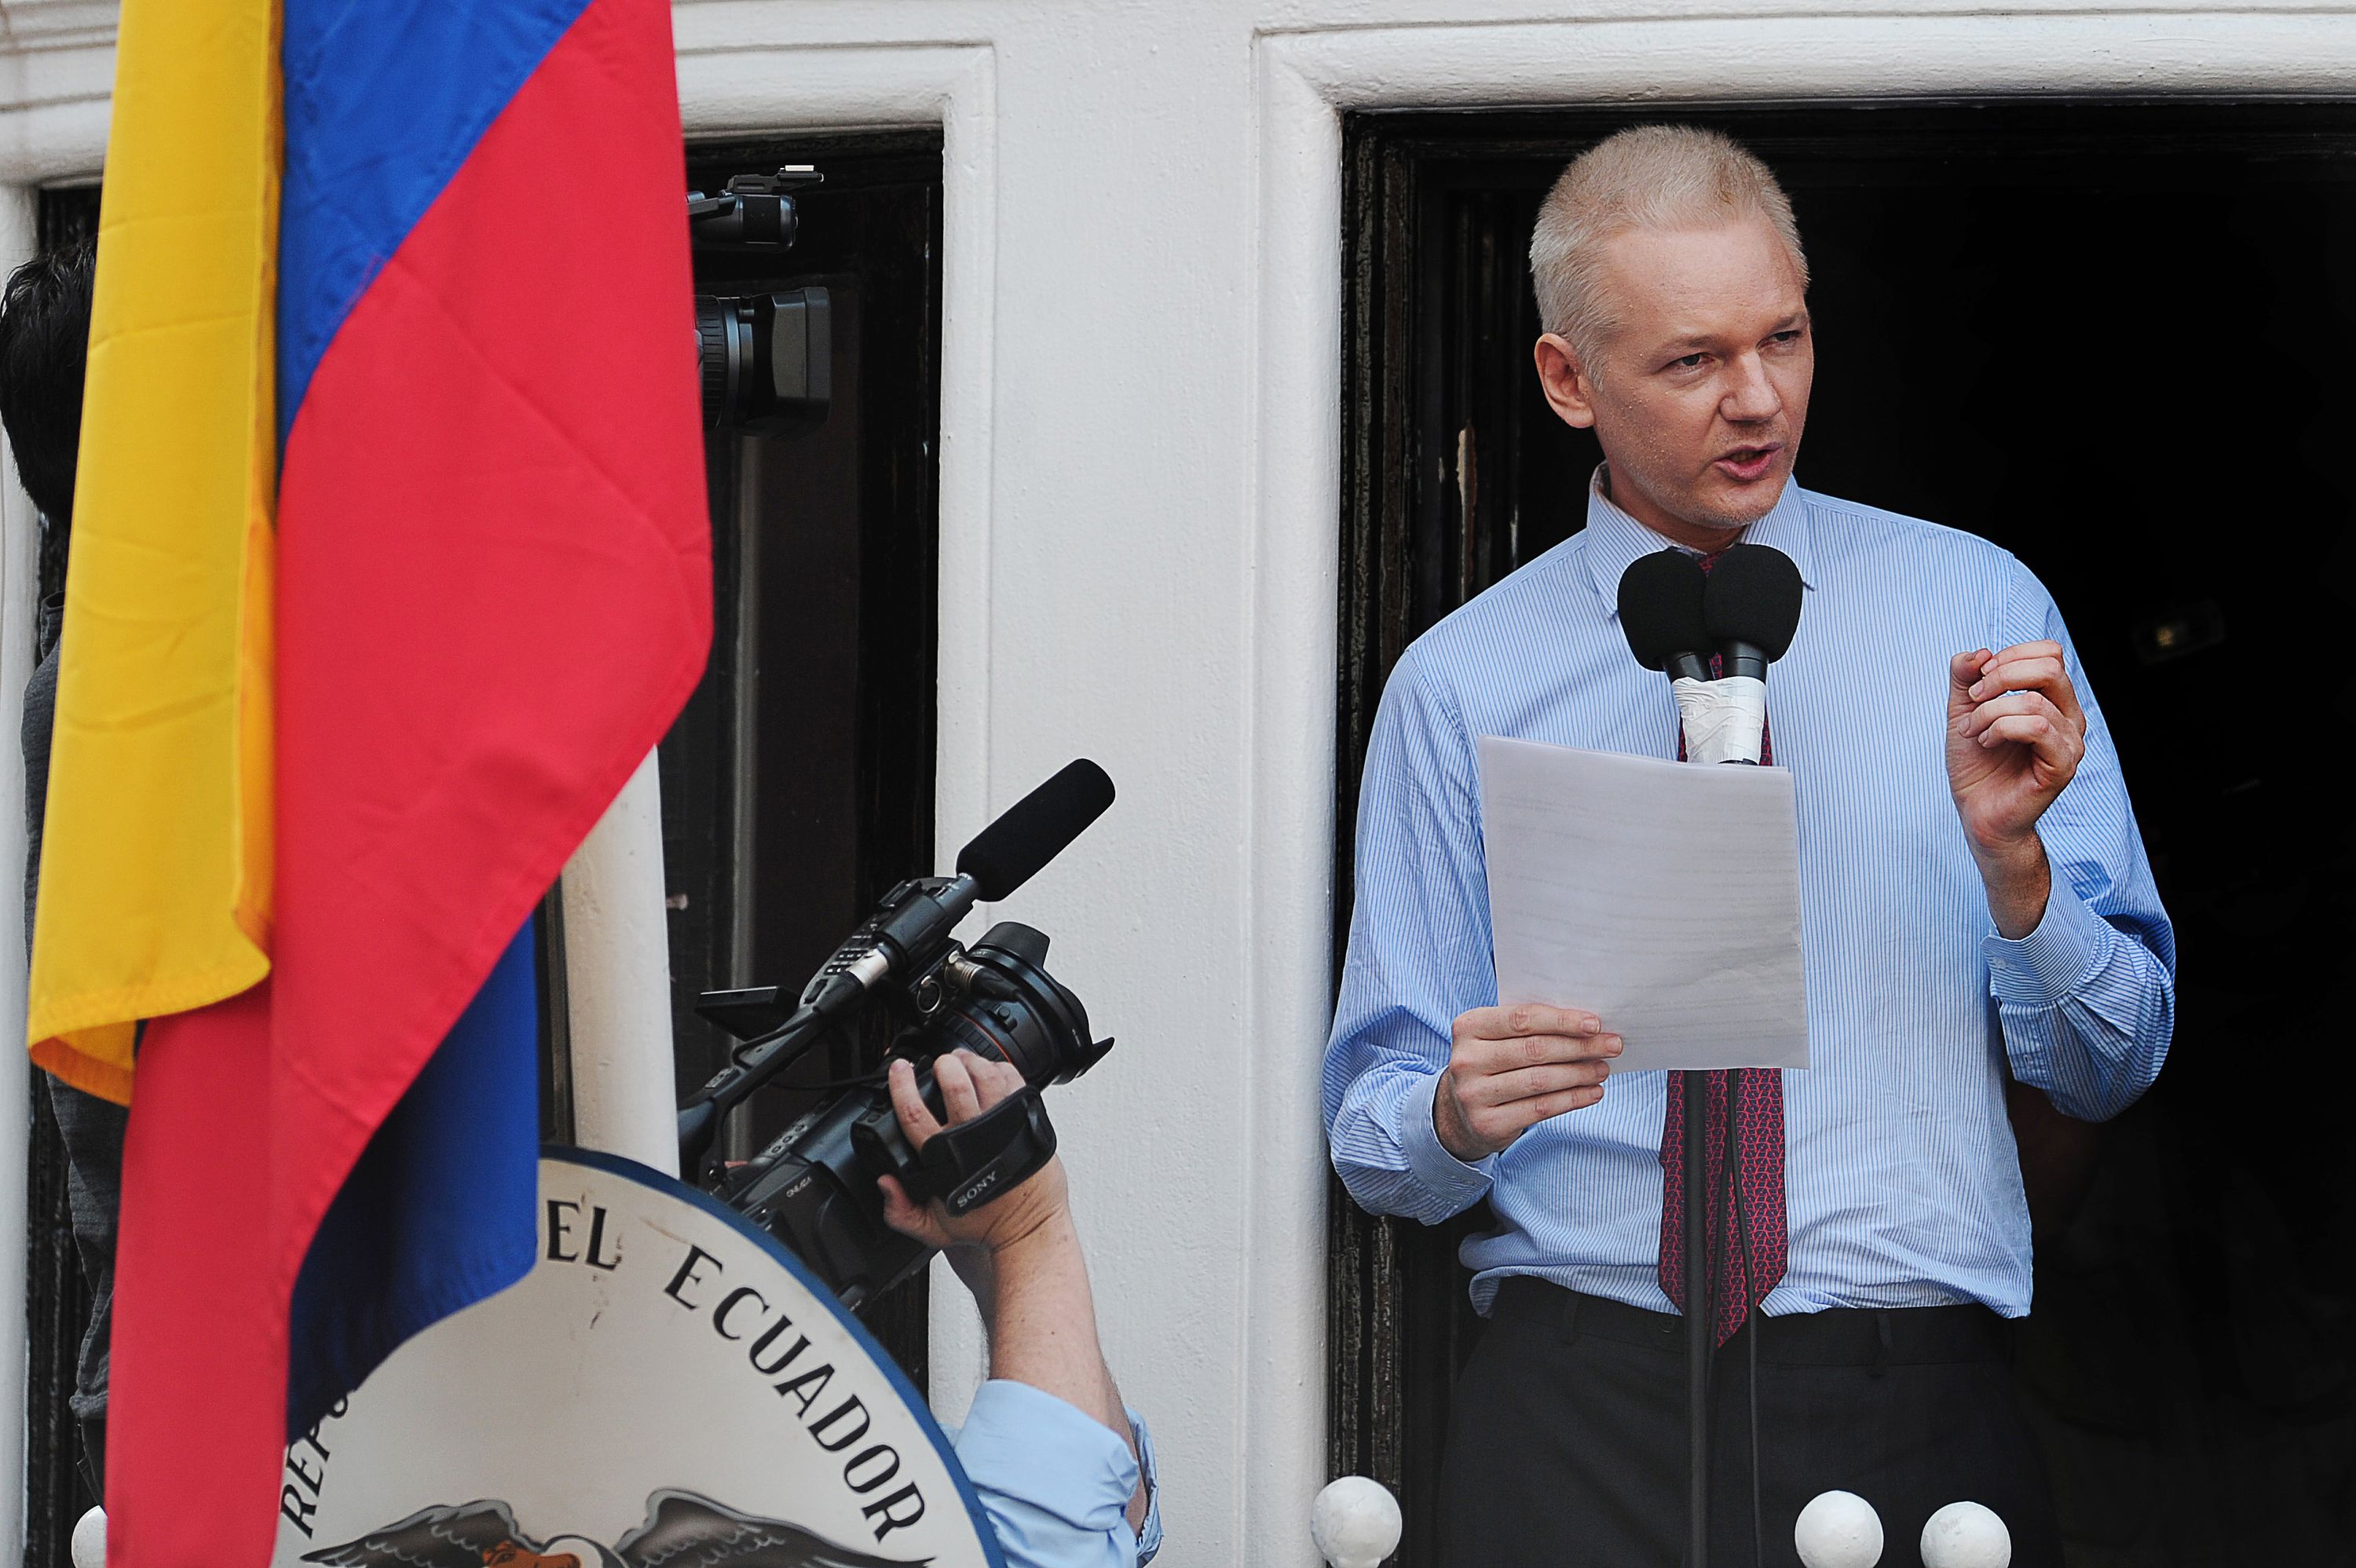 Assange emerges, as hypocritical and self-serving as ever National Post image pic